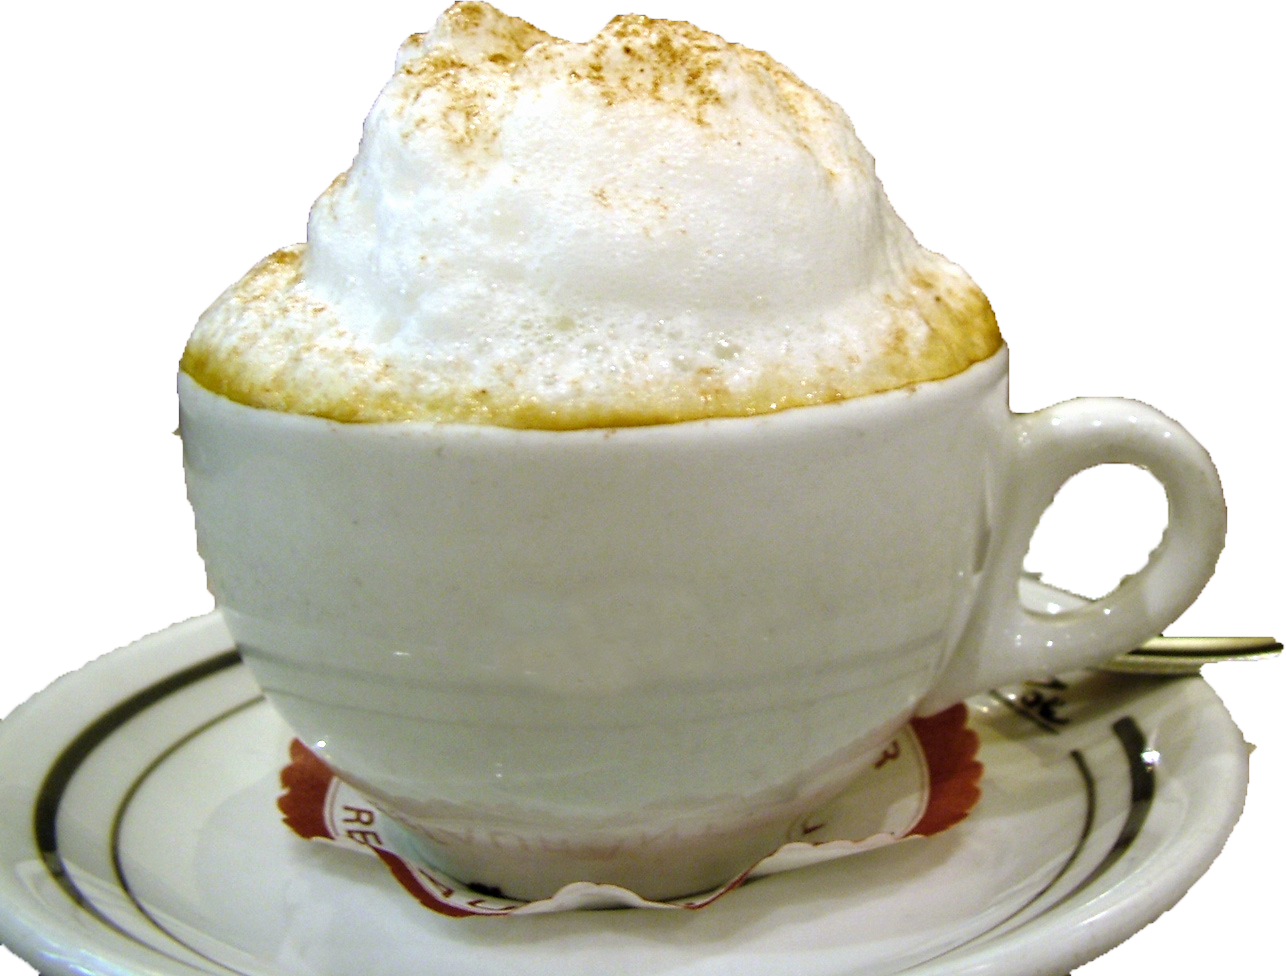 https://upload.wikimedia.org/wikipedia/commons/3/3a/Cup_of_Coffee_with_foam.png